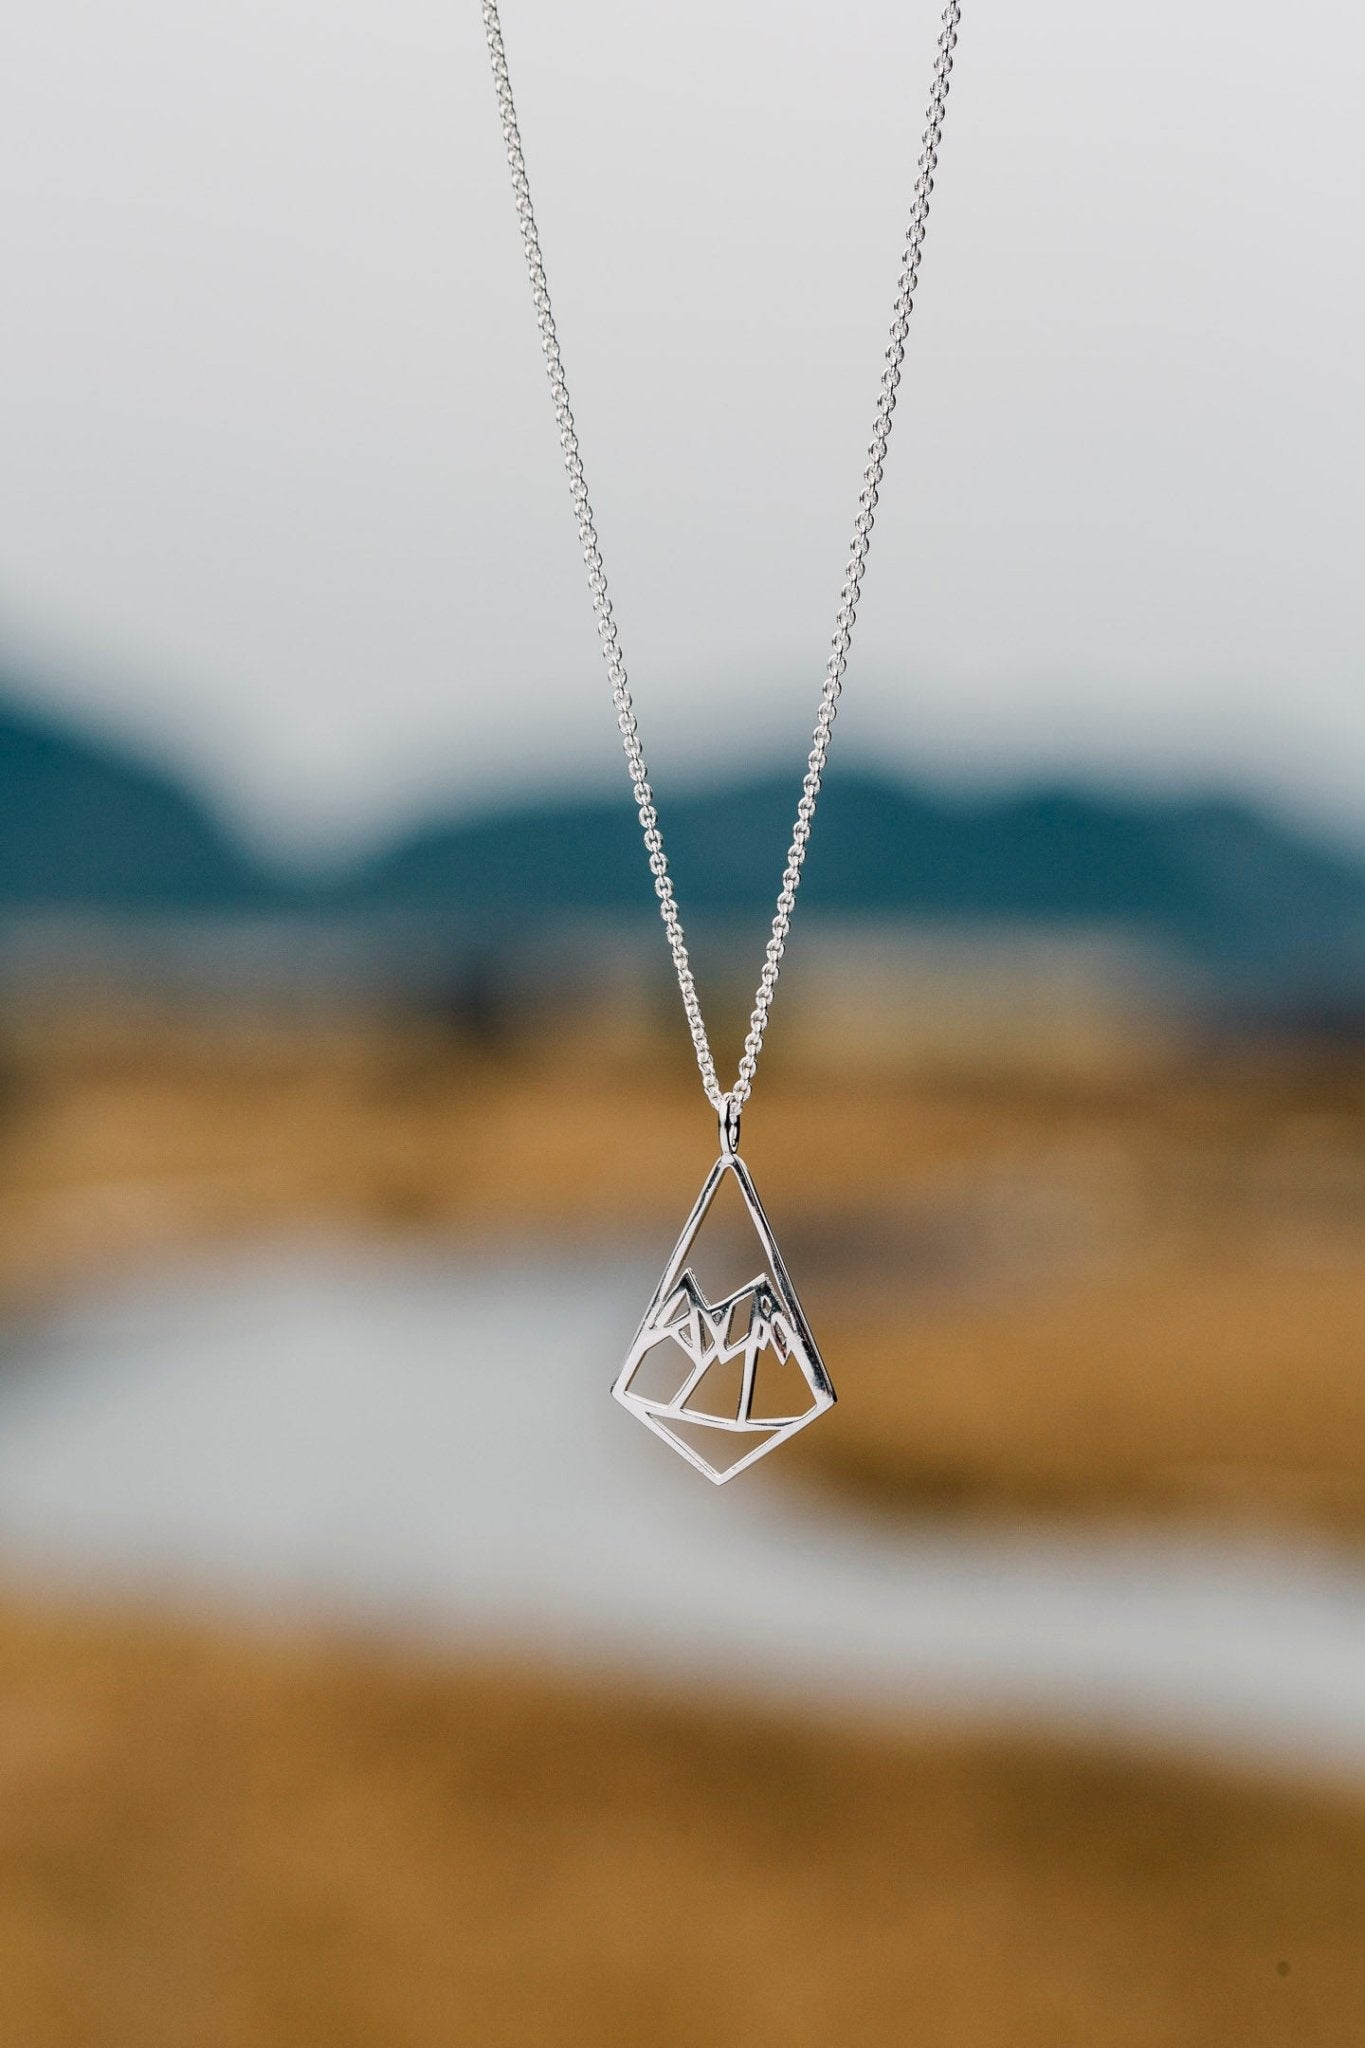 Small Geo Mountain pendant necklaces shown against blurred river background